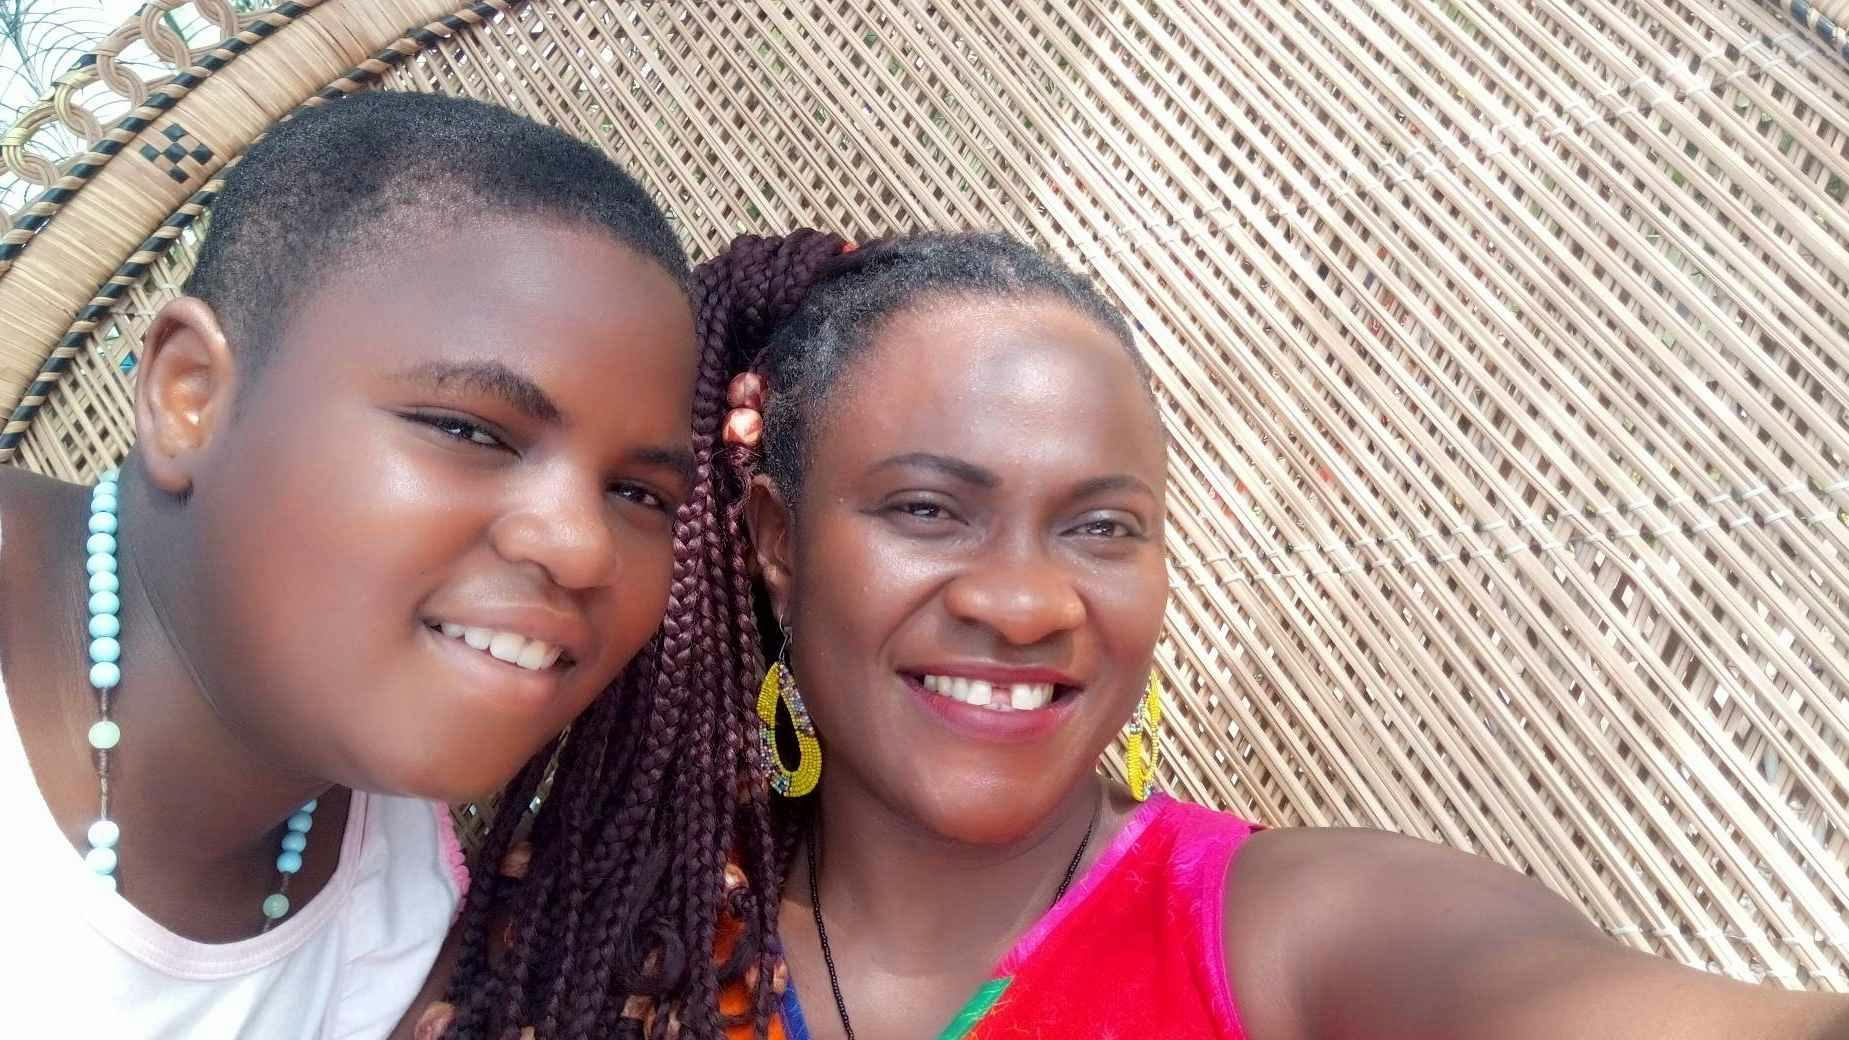 Image depicts a young girl and her mother wearing colorful jewelry and smiling at the camera.